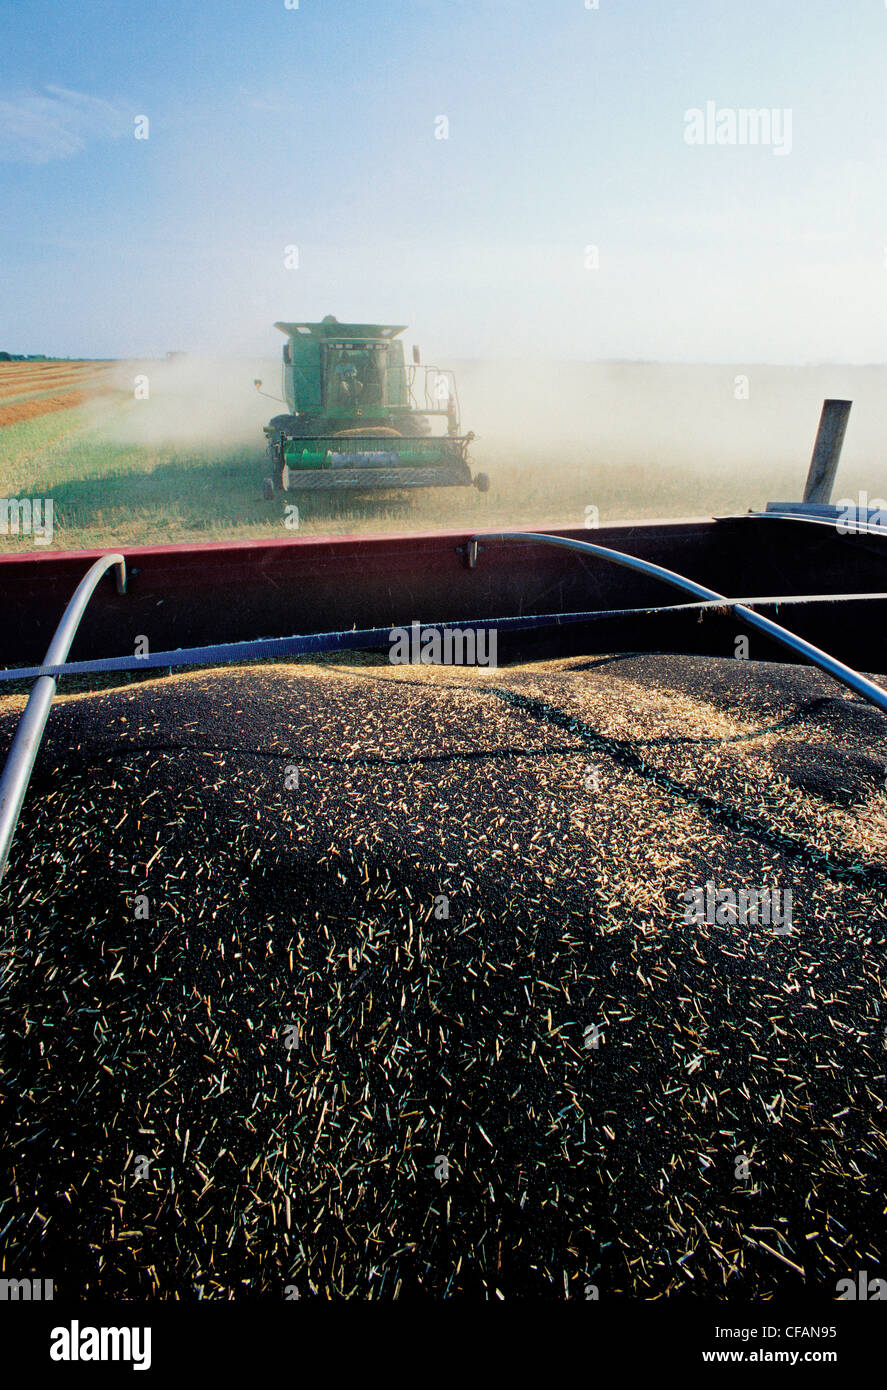 Harvested canola in the back of a farm truck and a combine harvester in the background, near Dugald, Manitoba, Canada Stock Photo